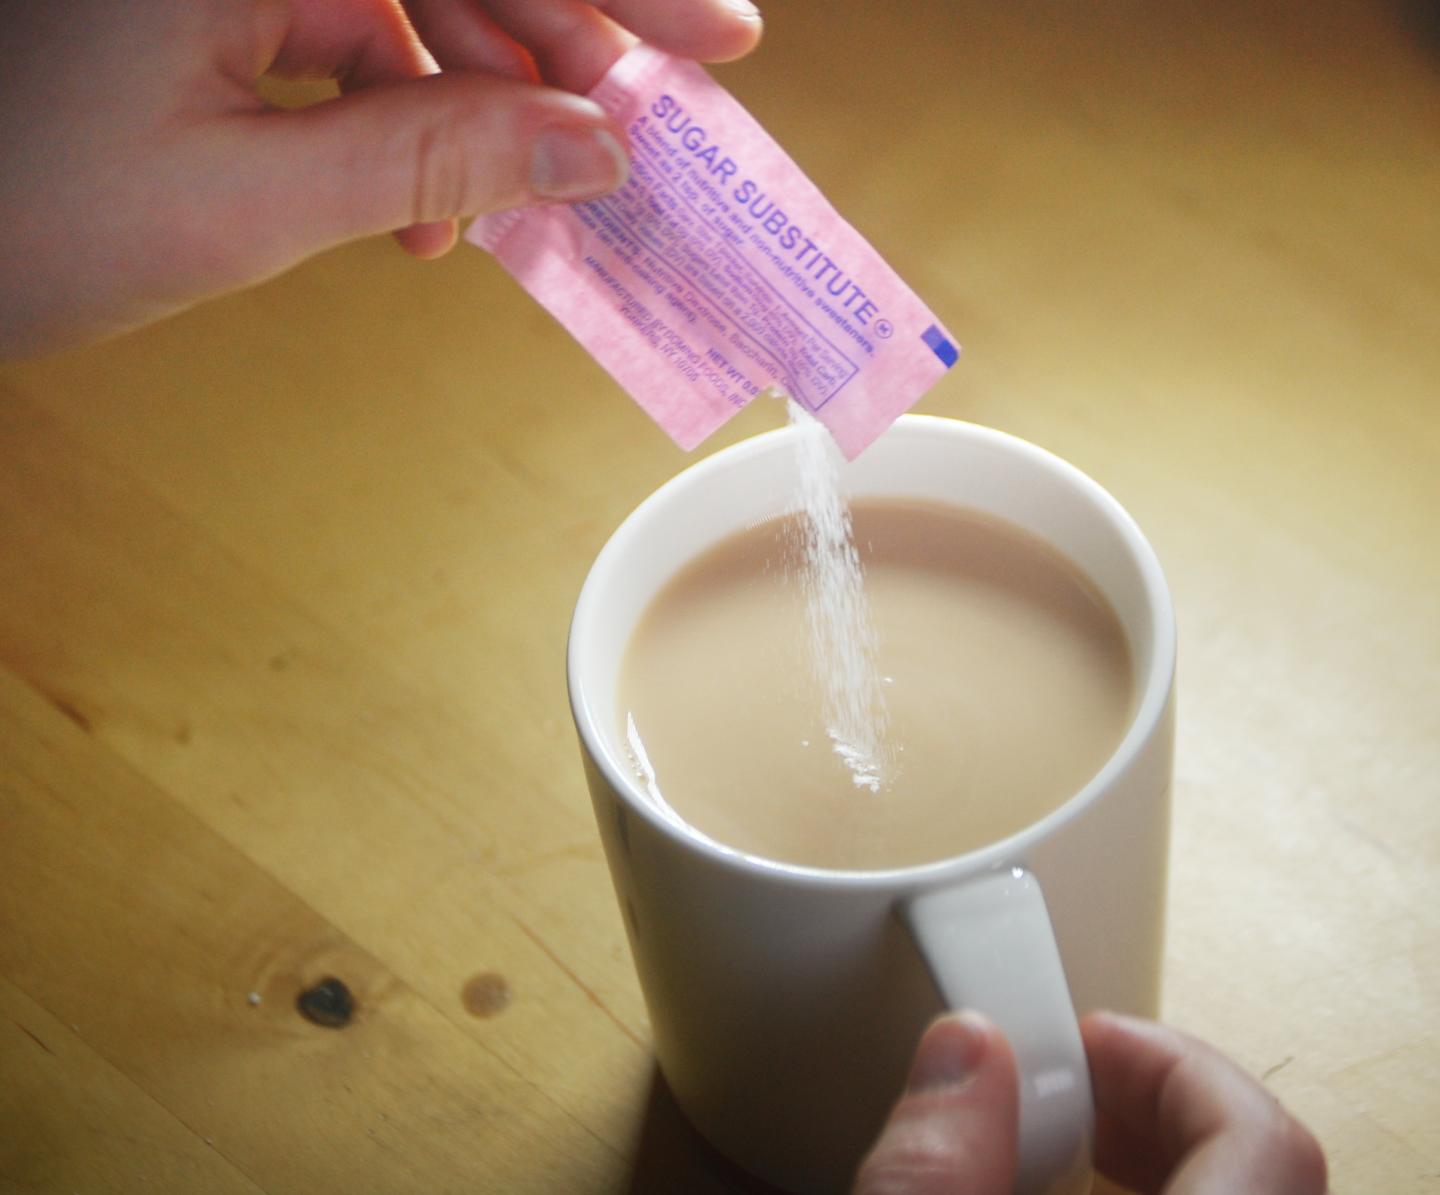 Popular Artificial Sweetener Could Lead to New Treatments for Aggressive Cancers